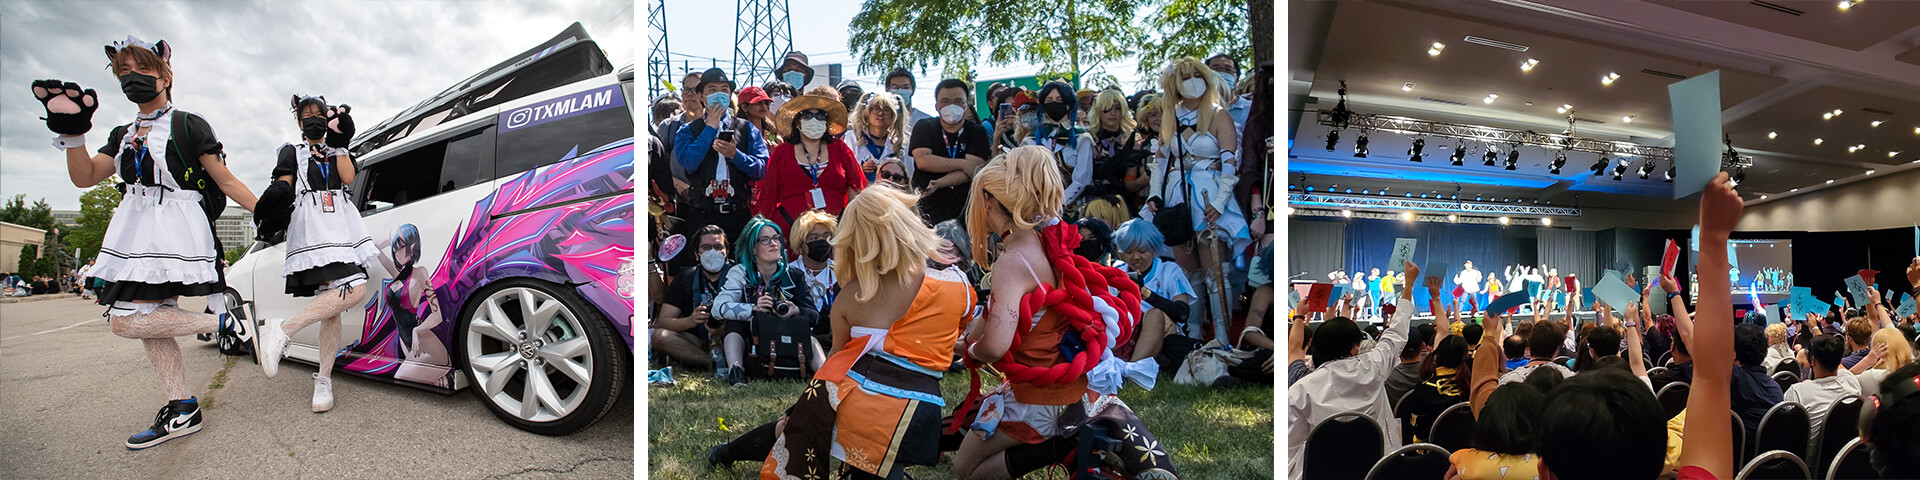 Photos of other events at Anime North